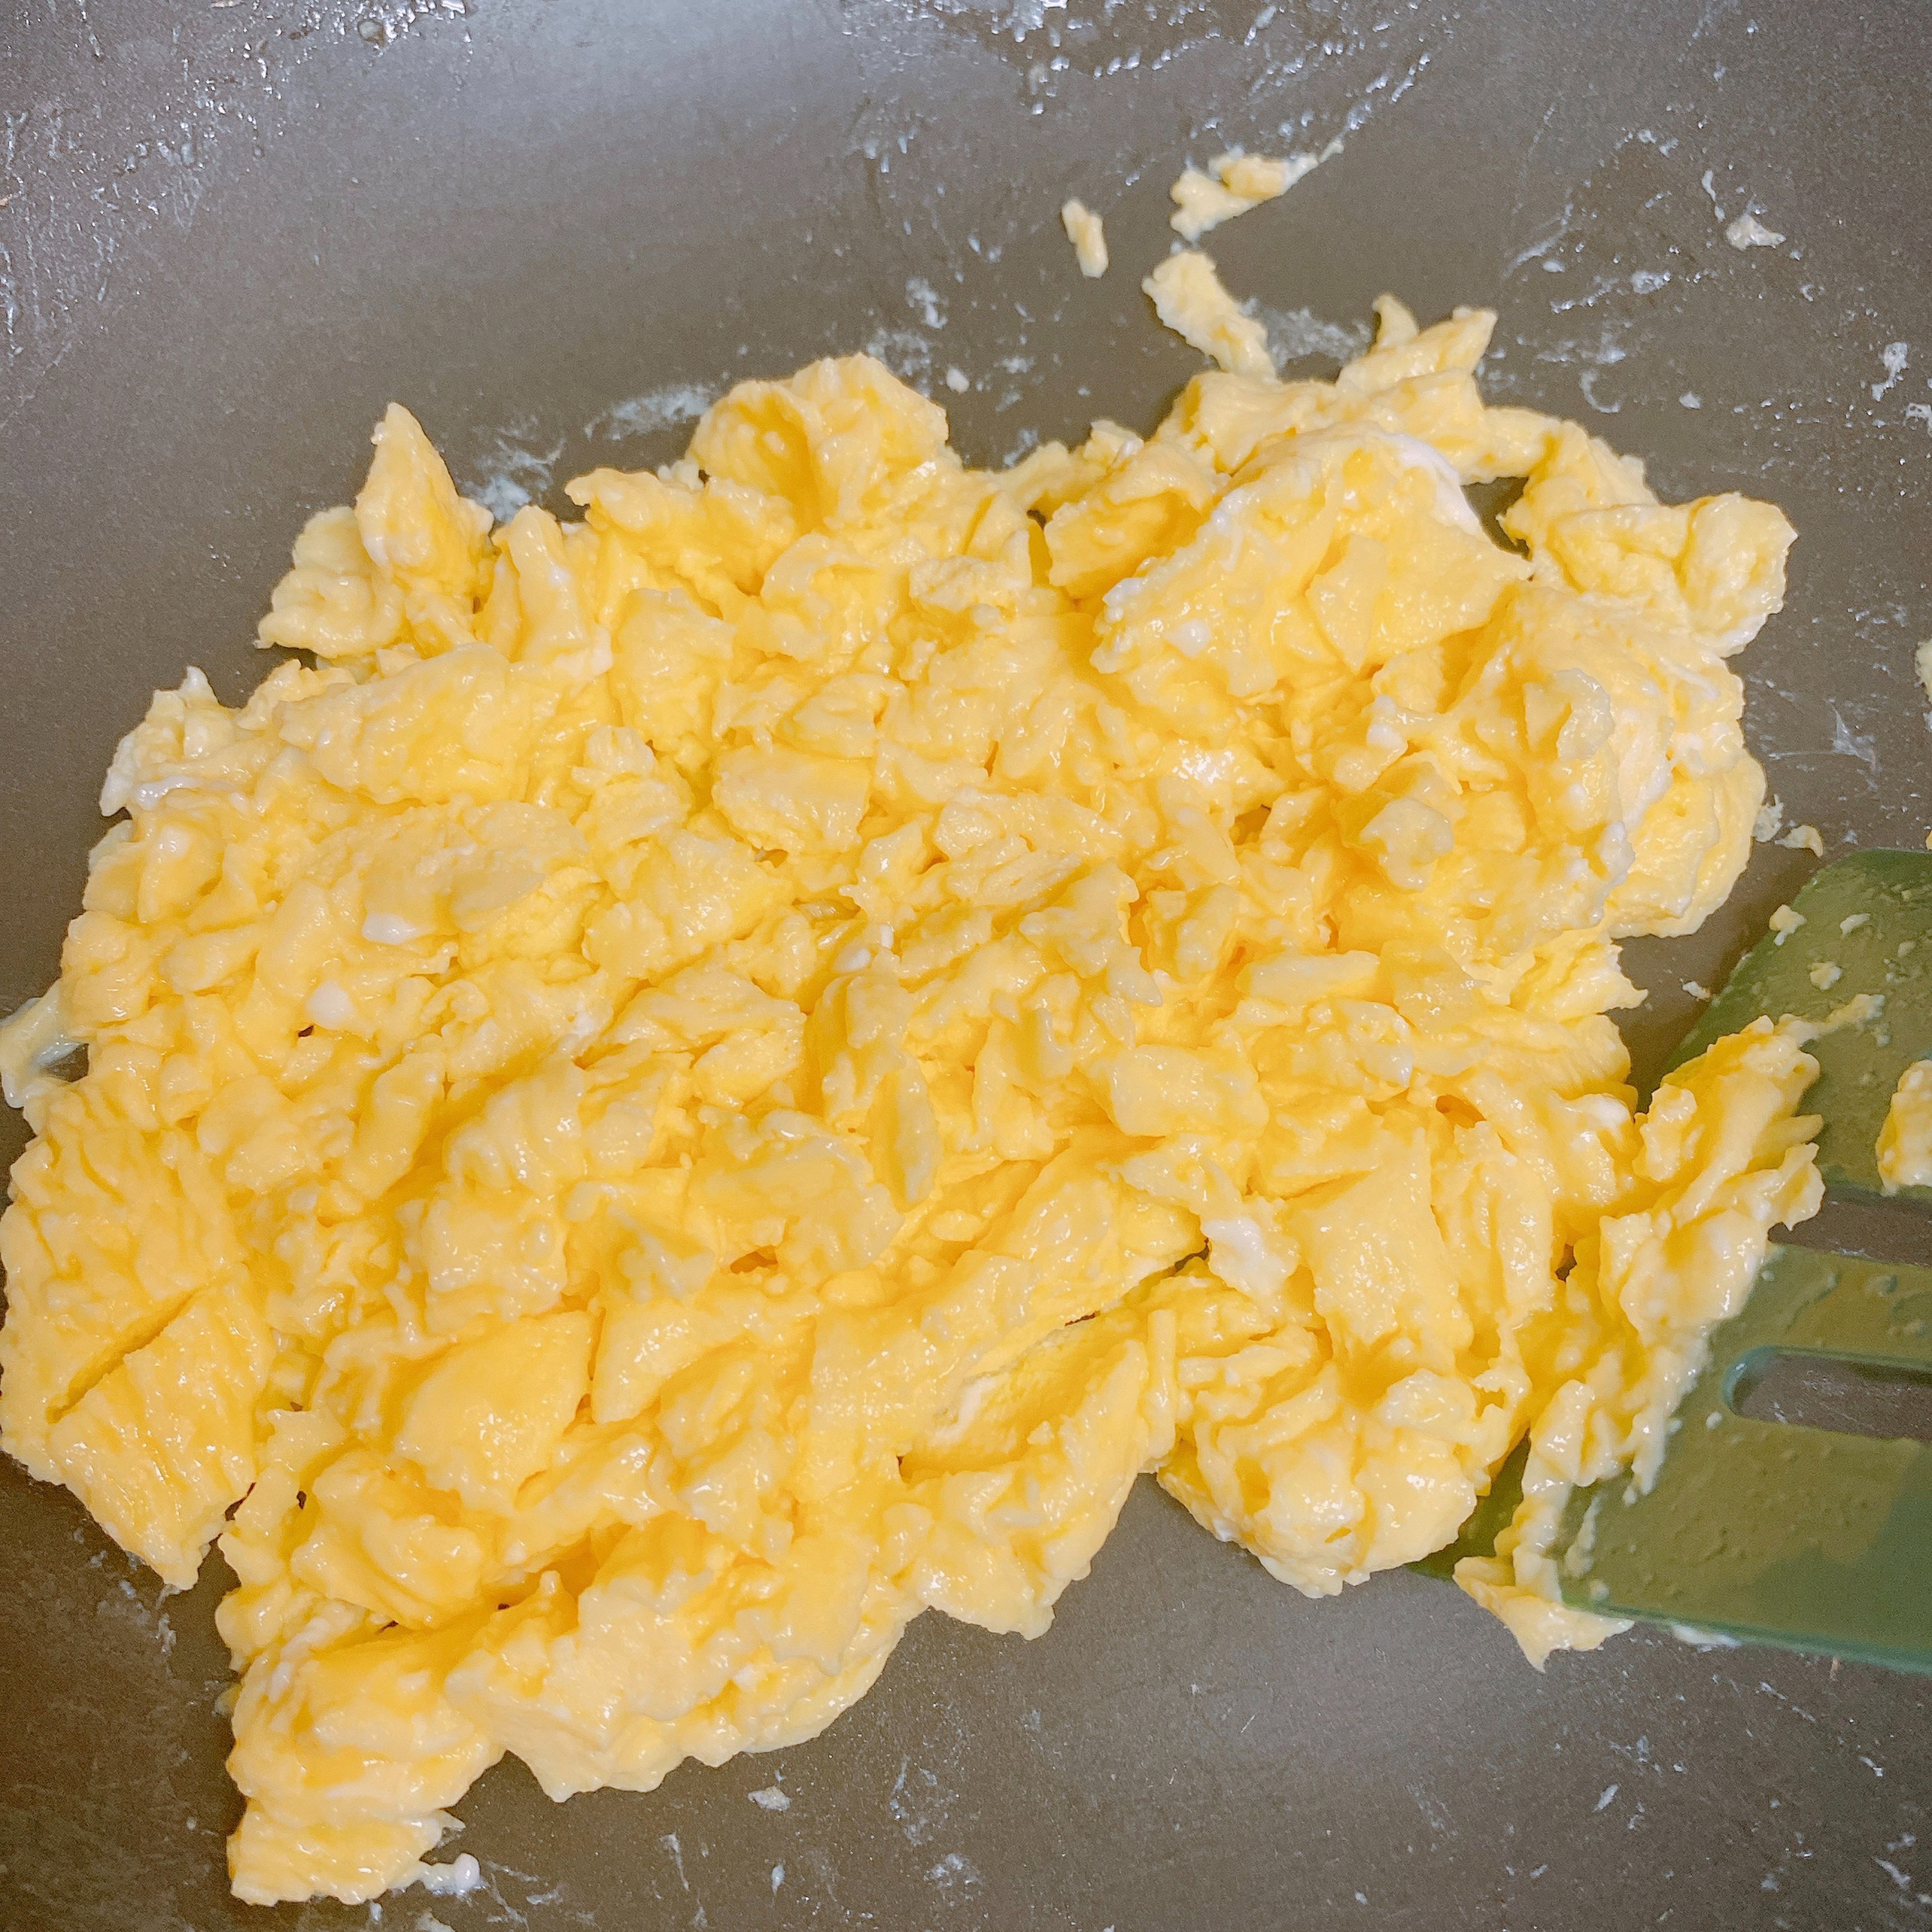 Heat half of the oil and scramble the egg until it’s fully cooked. Pour it into a separate bowl.